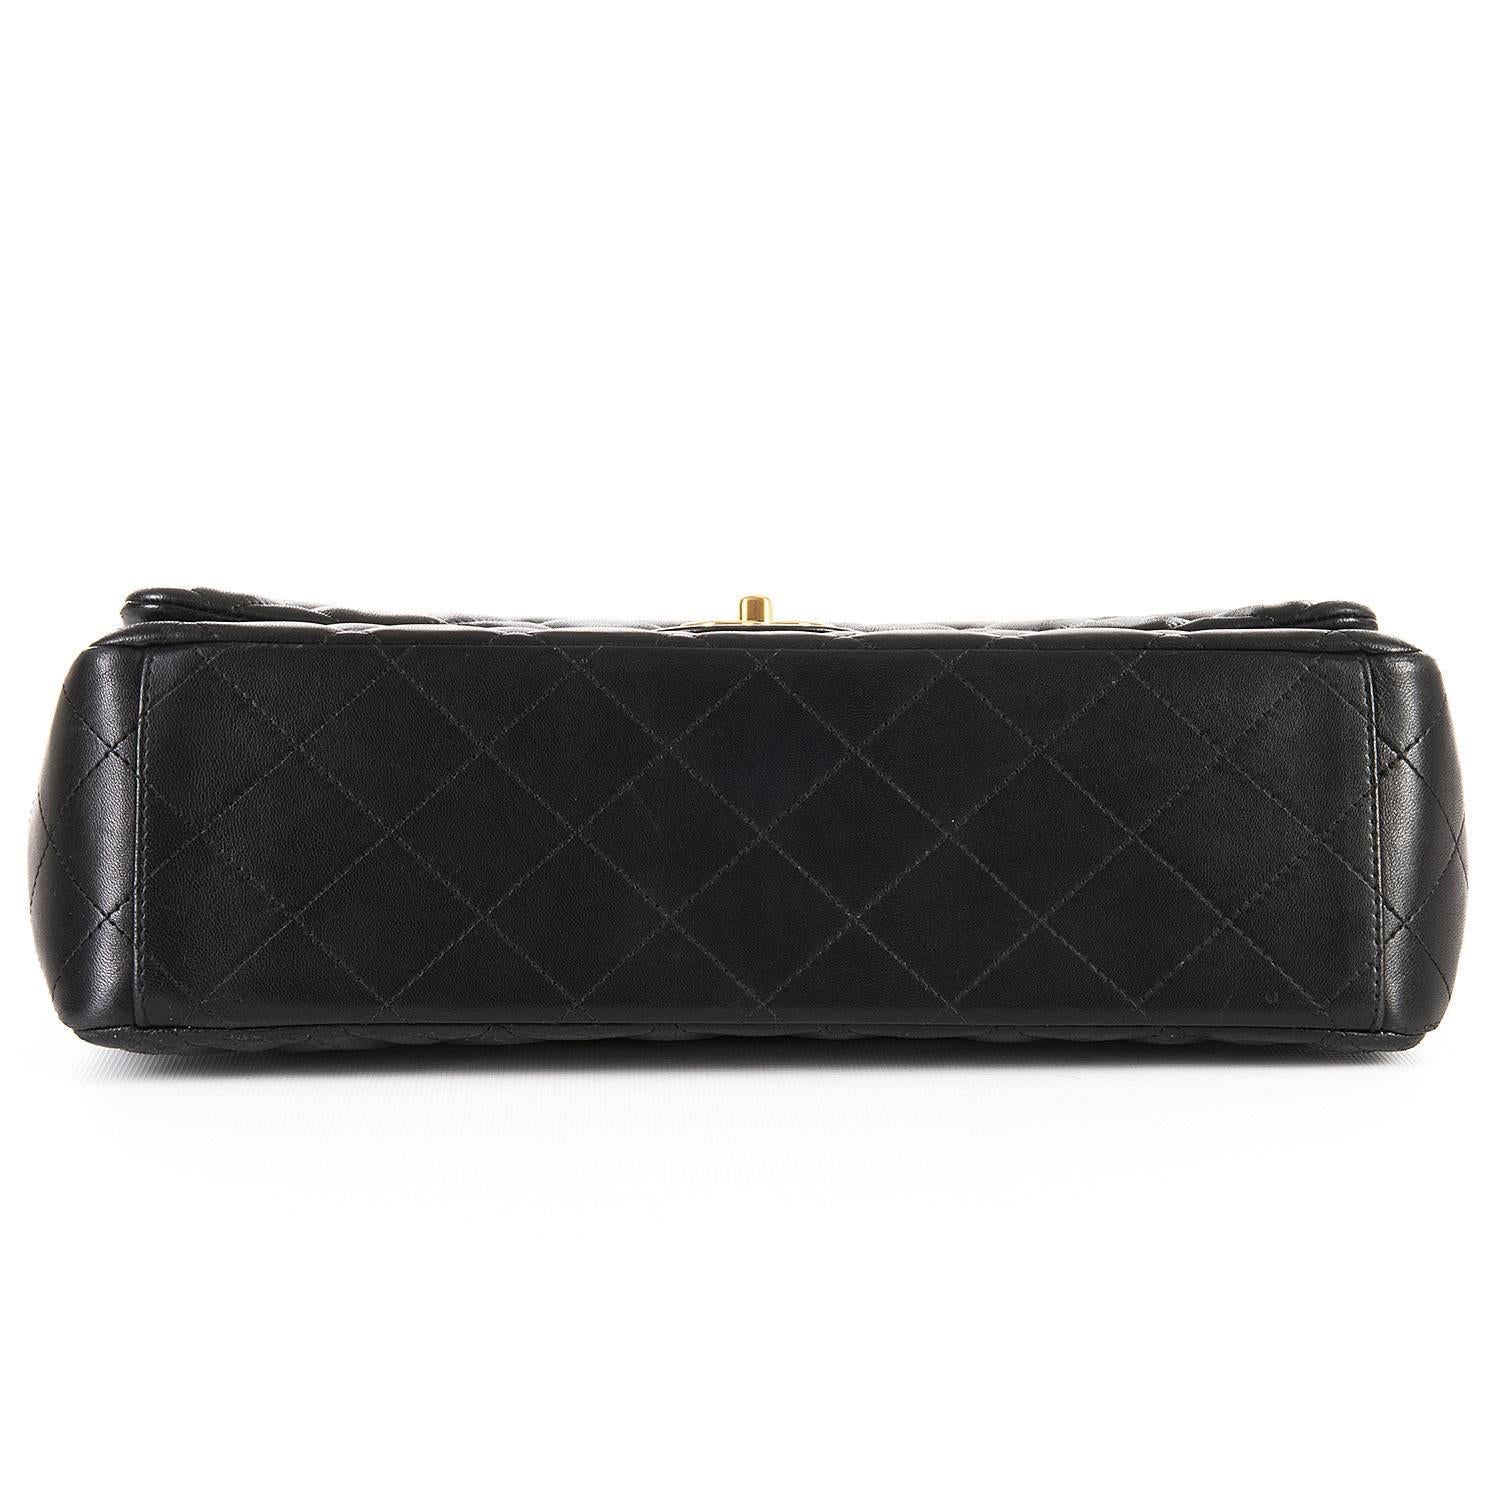 WOW Chanel Black Maxi Double Flap Quilted Bag with Gold hardware In Excellent Condition For Sale In By Appointment Only, GB